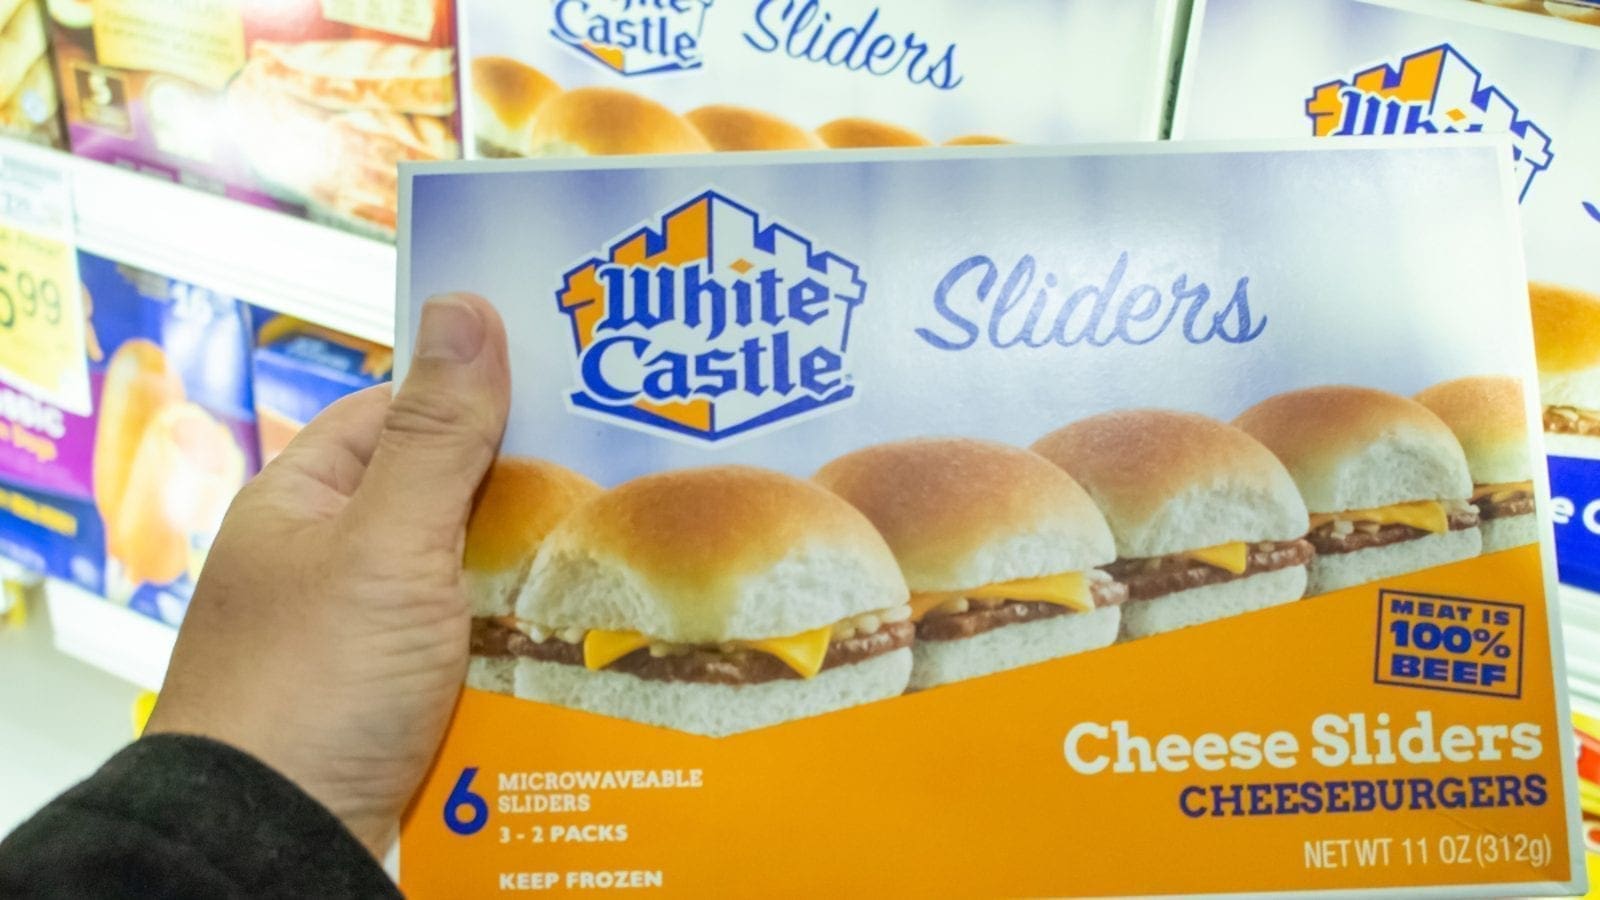 White Castle invests in additional retail capabilities as General Assembly Pizza secures new production facility